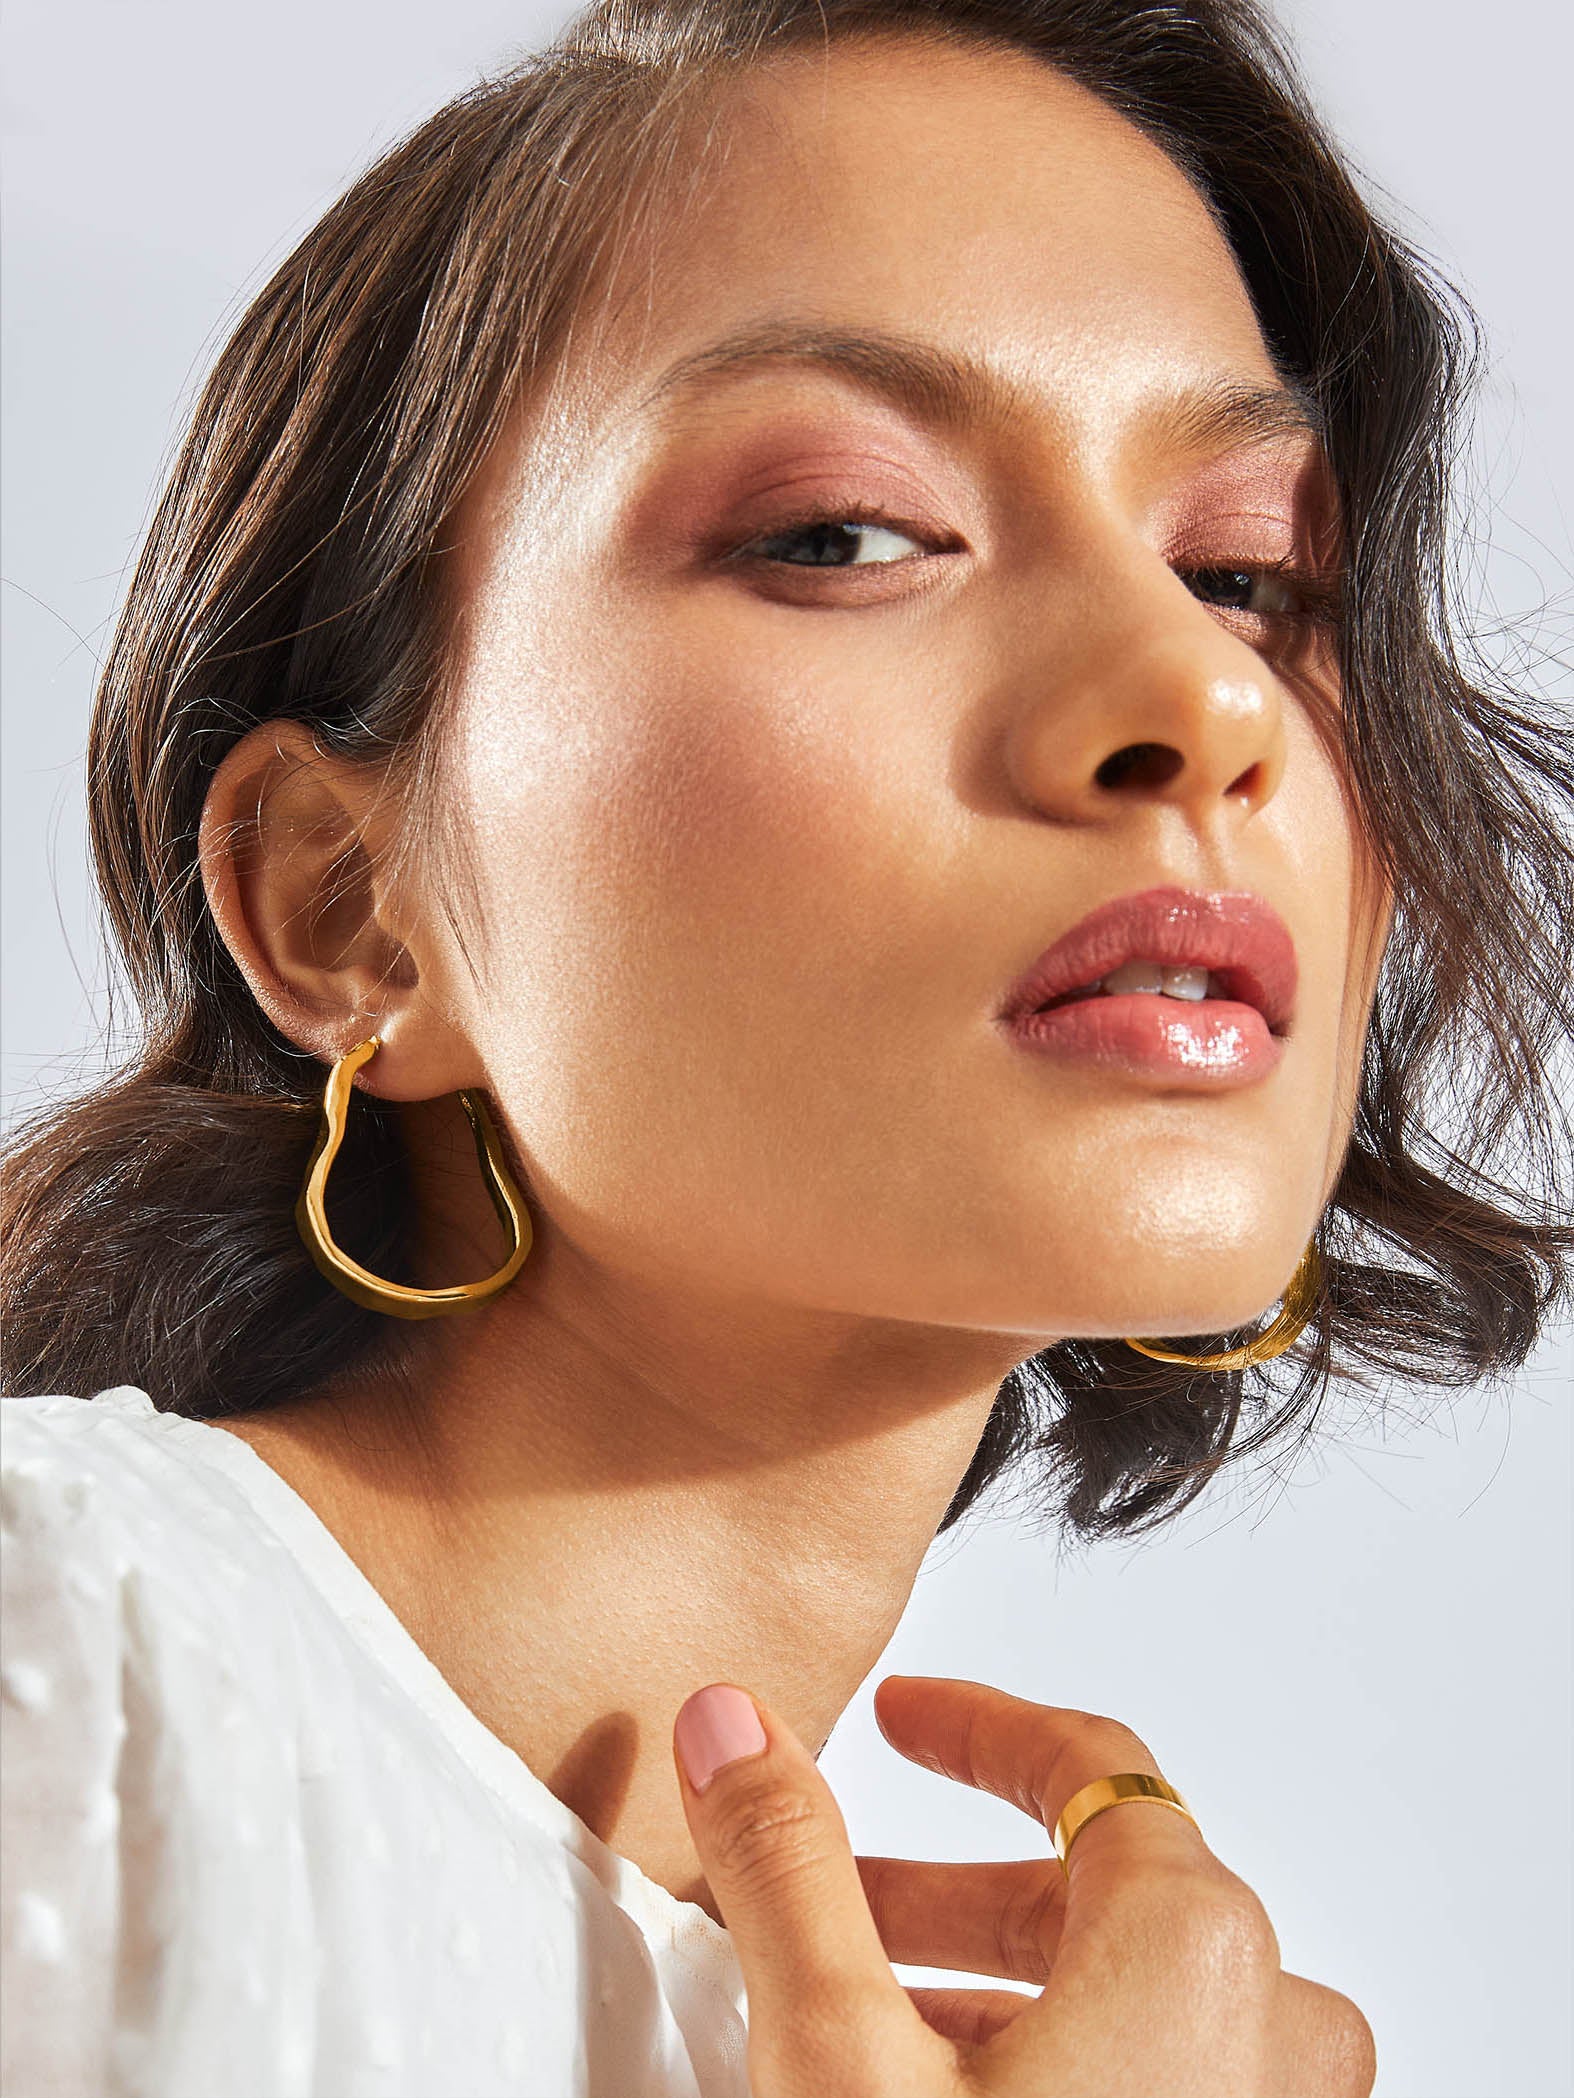 Gold Twisted Hoops